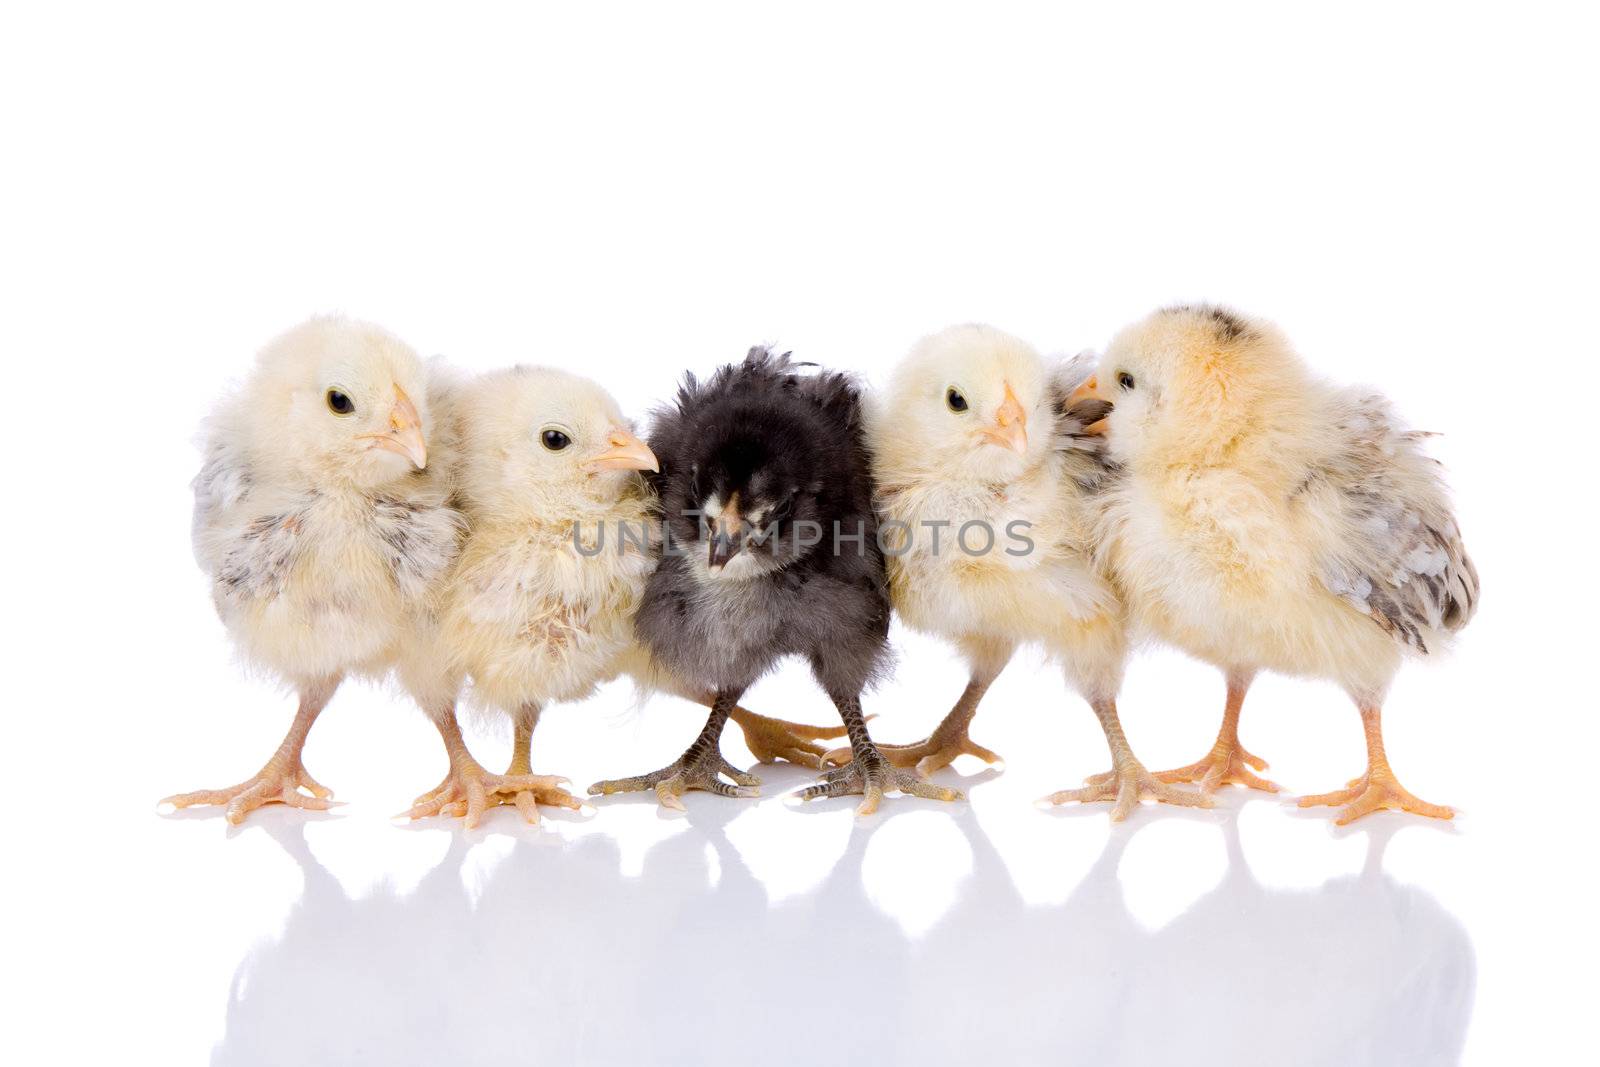 Five chicks in a row by Fotosmurf